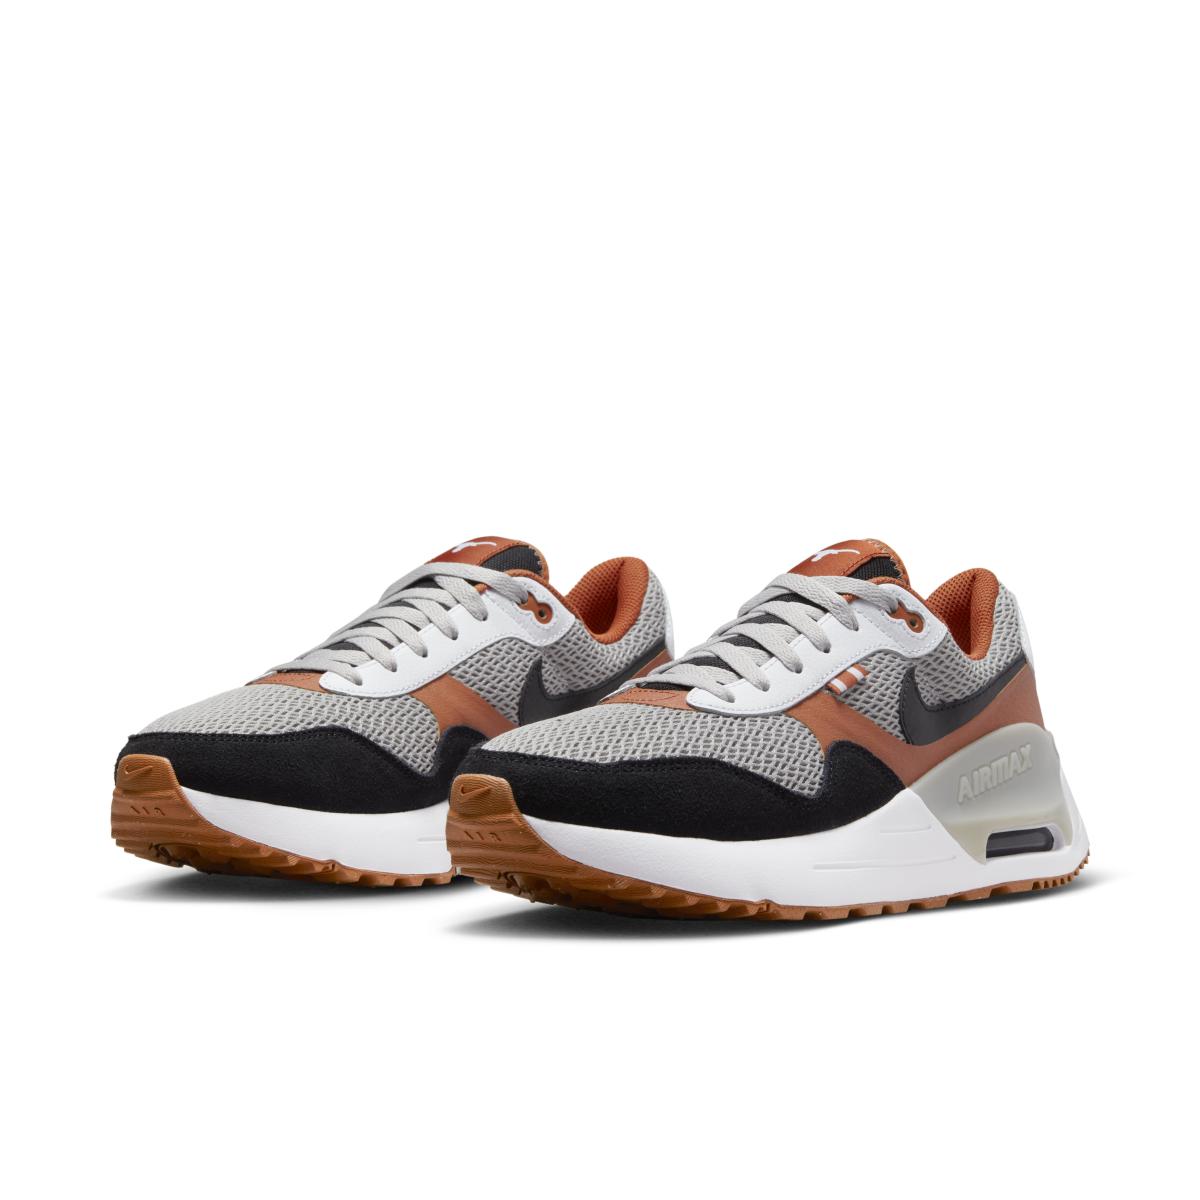 Texas Longhorns Nike Air Max Collection, how to buy your Texas Air